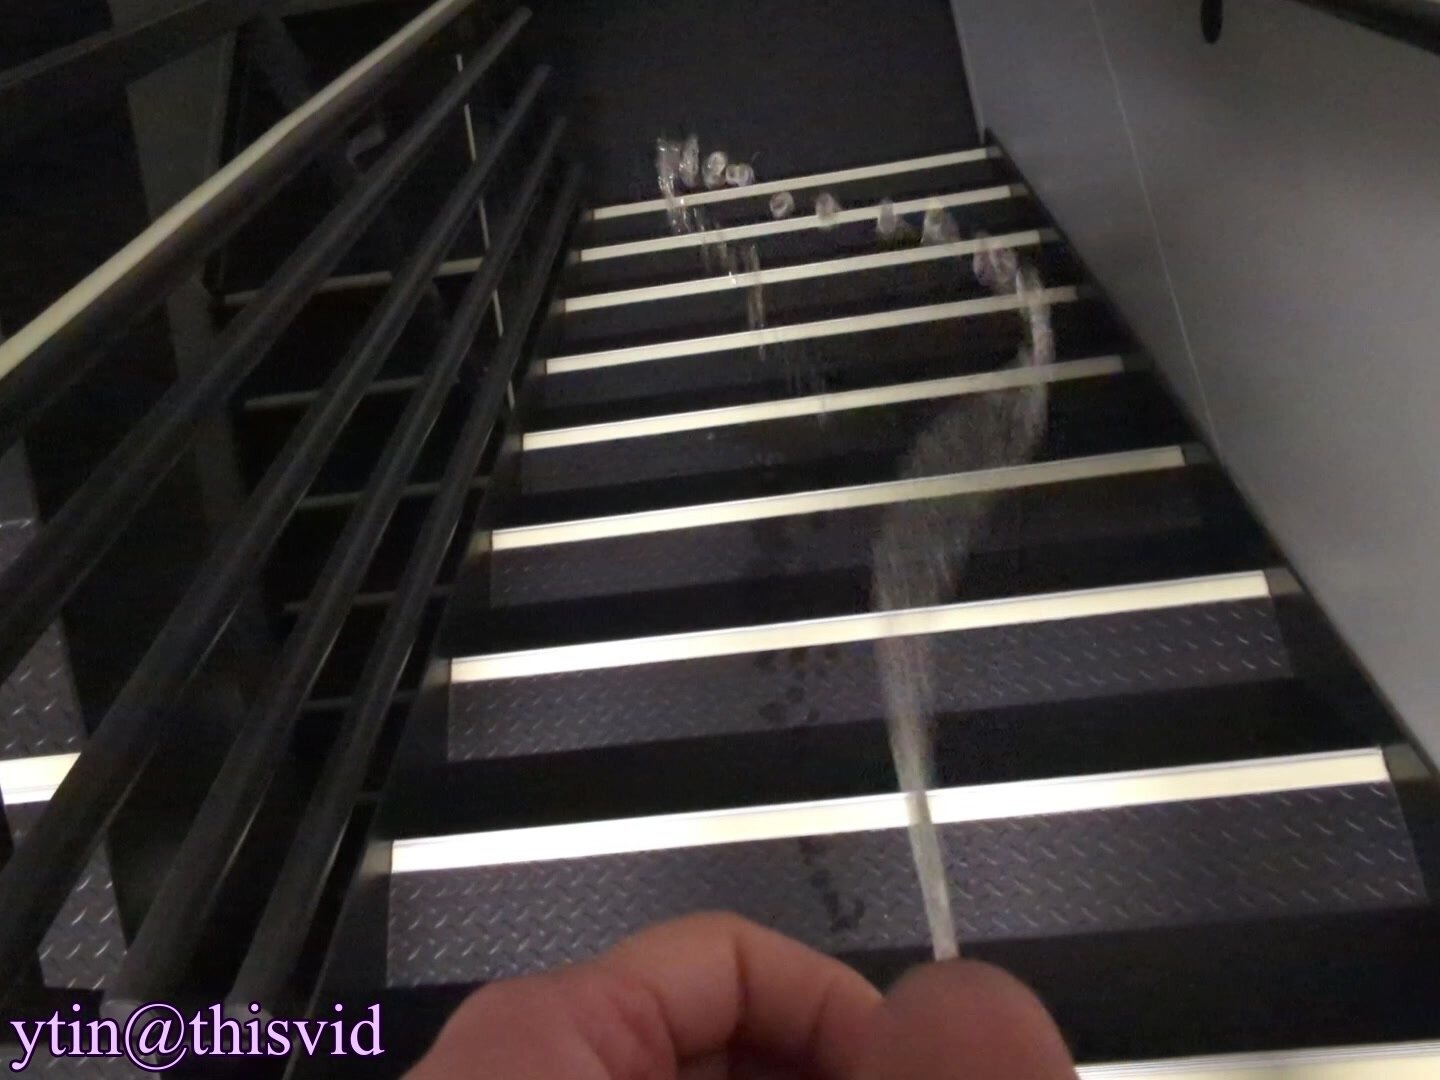 Hotel Public Stairwell Morning Pissing